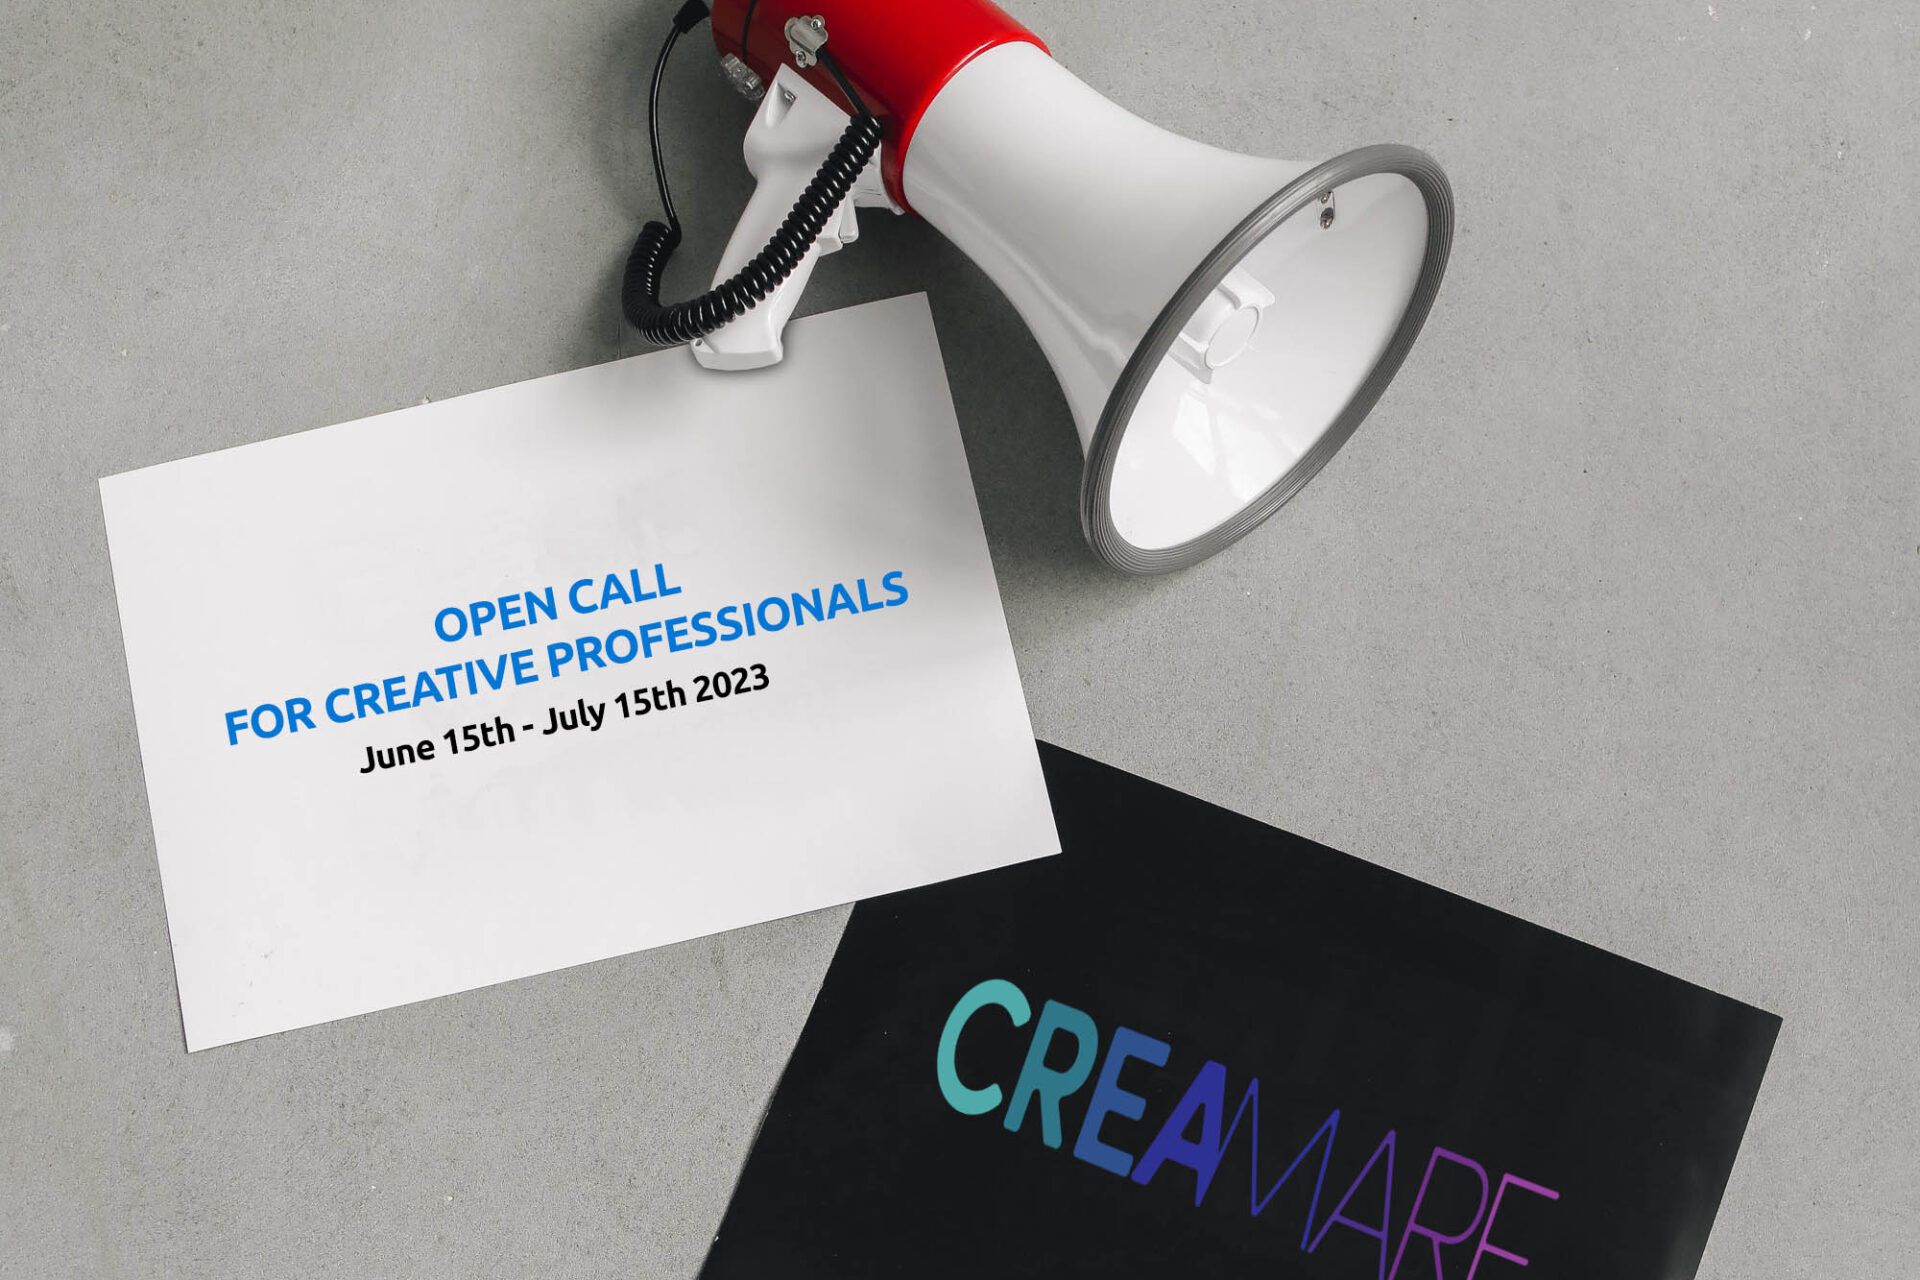 Open Call for Creative Professionals